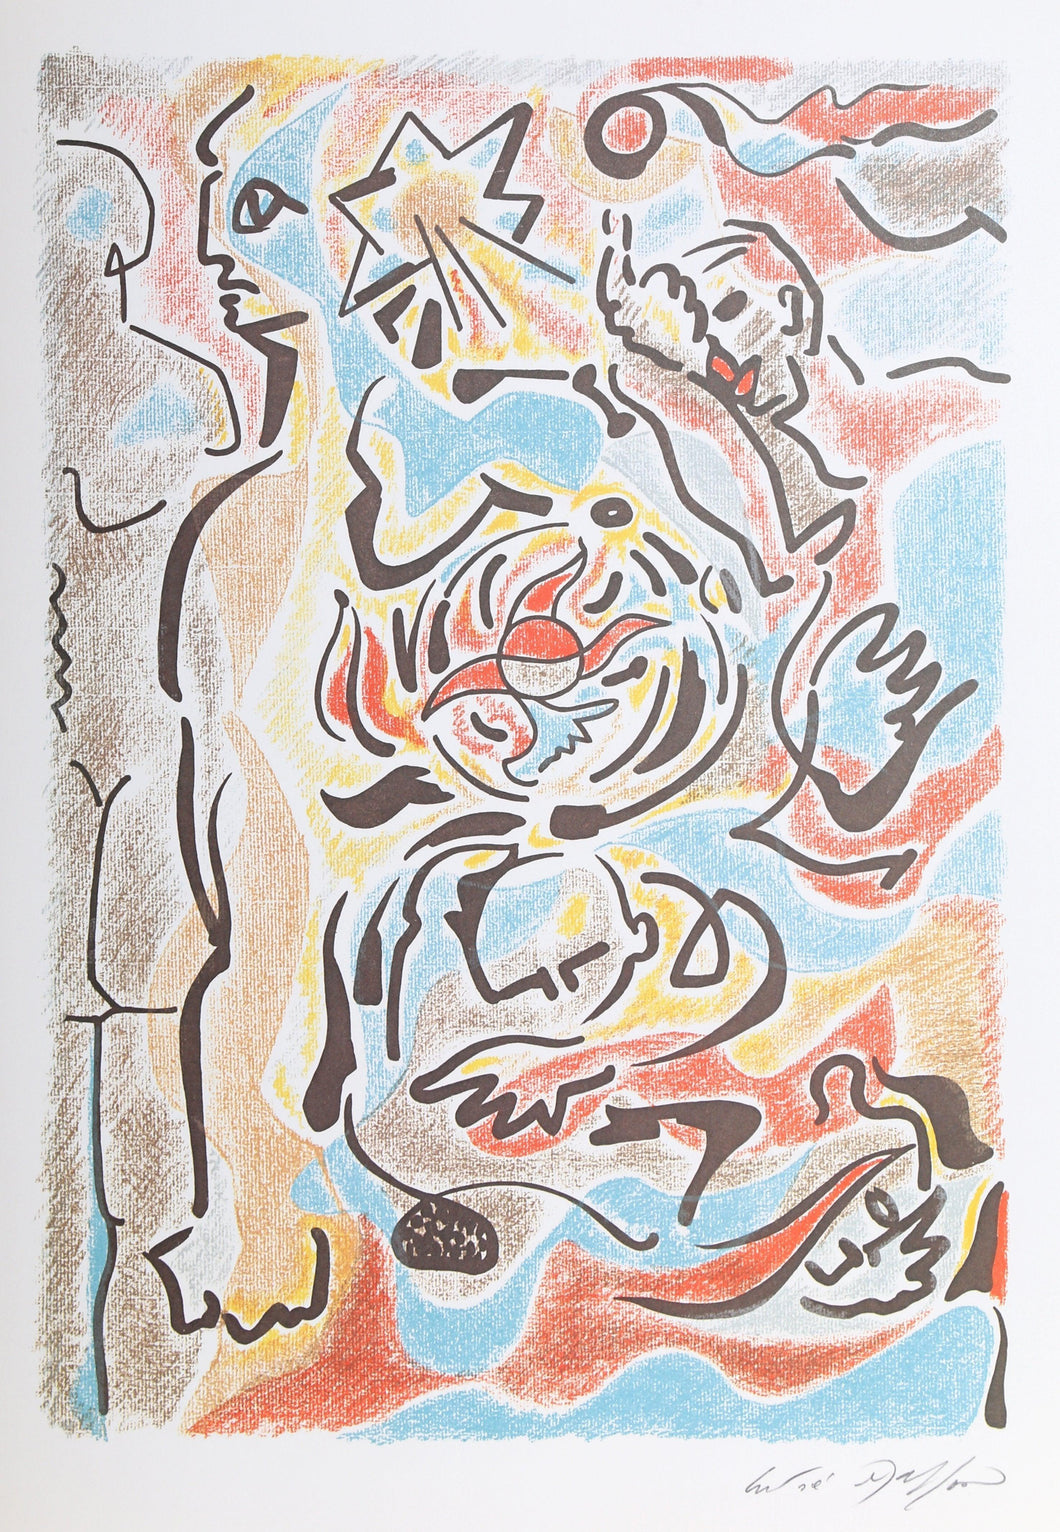 Sun Figures from the Omaggio a Michelangelo Portfolio Poster | Andre Masson,{{product.type}}